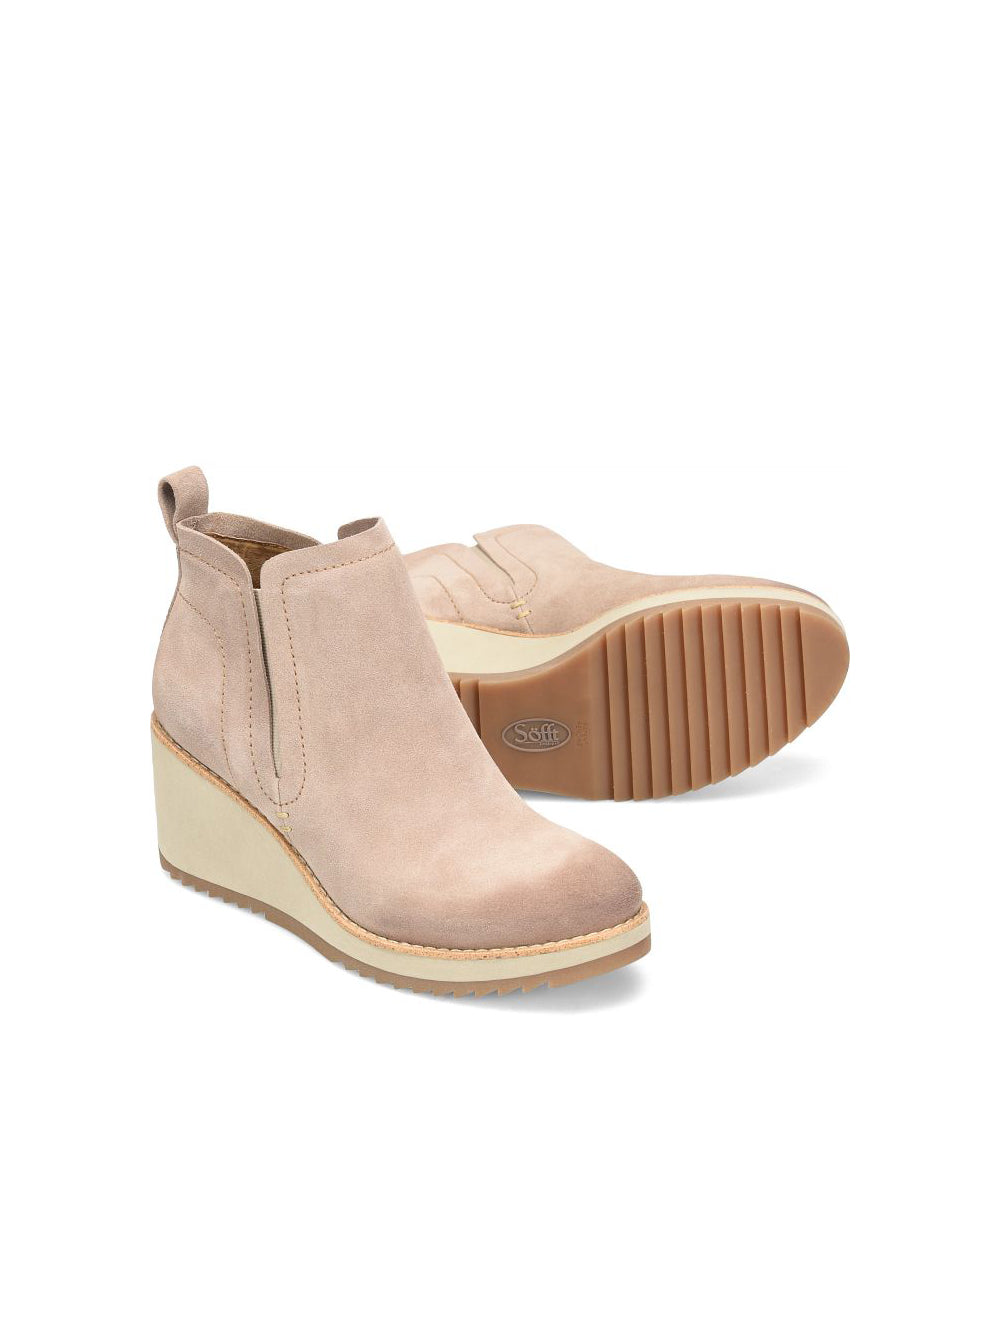 sofft shoes emeree wedge chelsea ankle boot in baywater suede tan